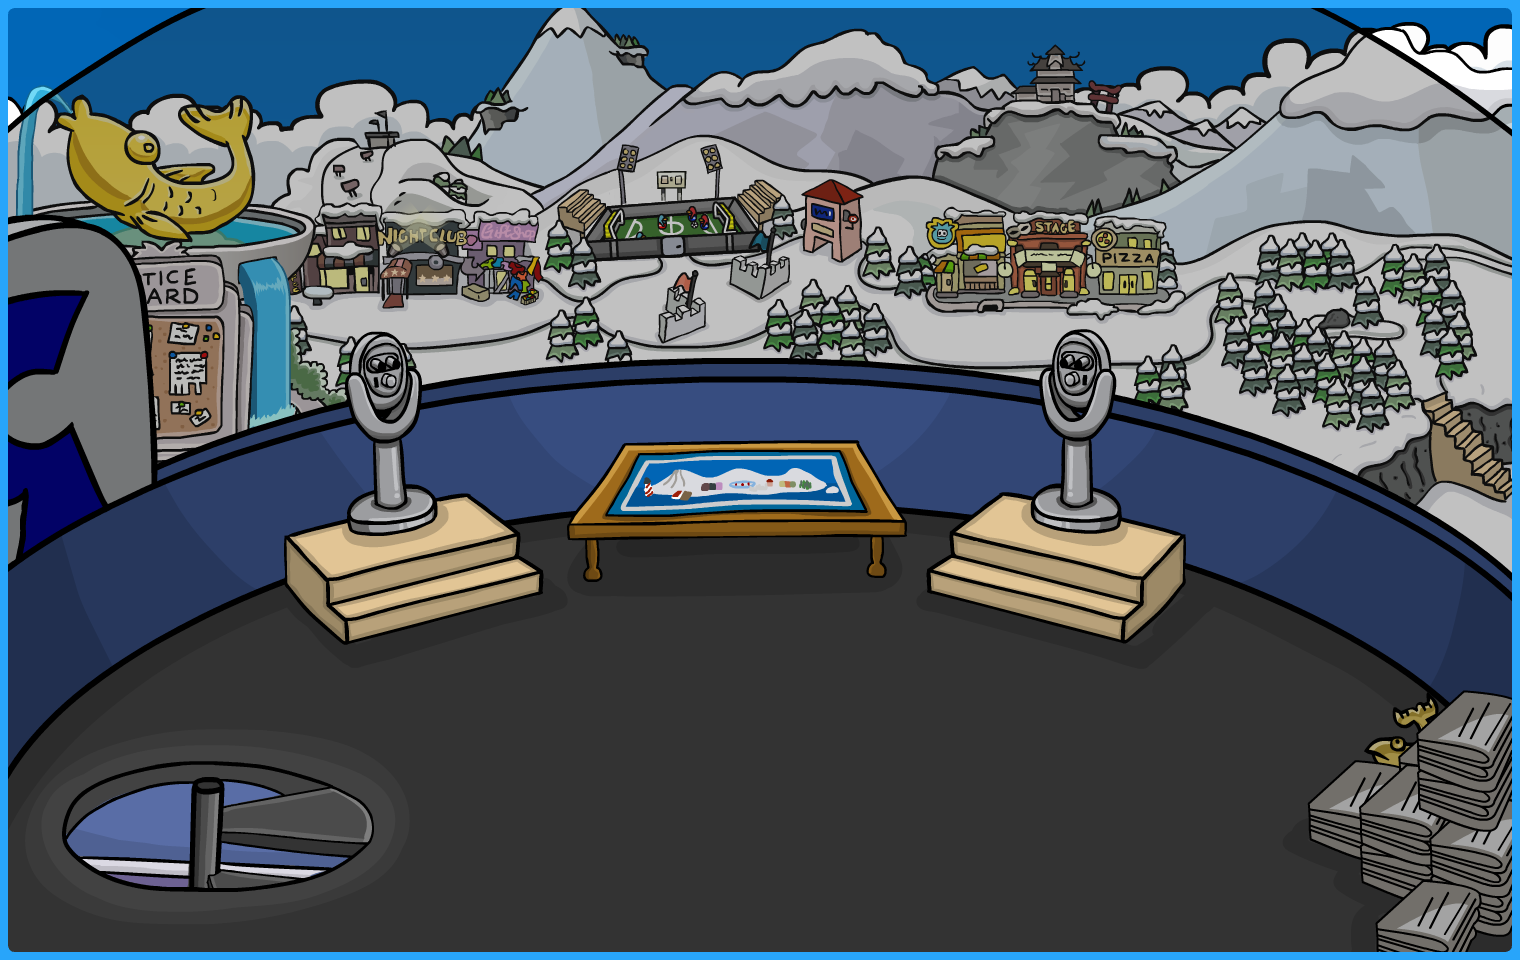 New Club Penguin has added stage as a permanent room along with a